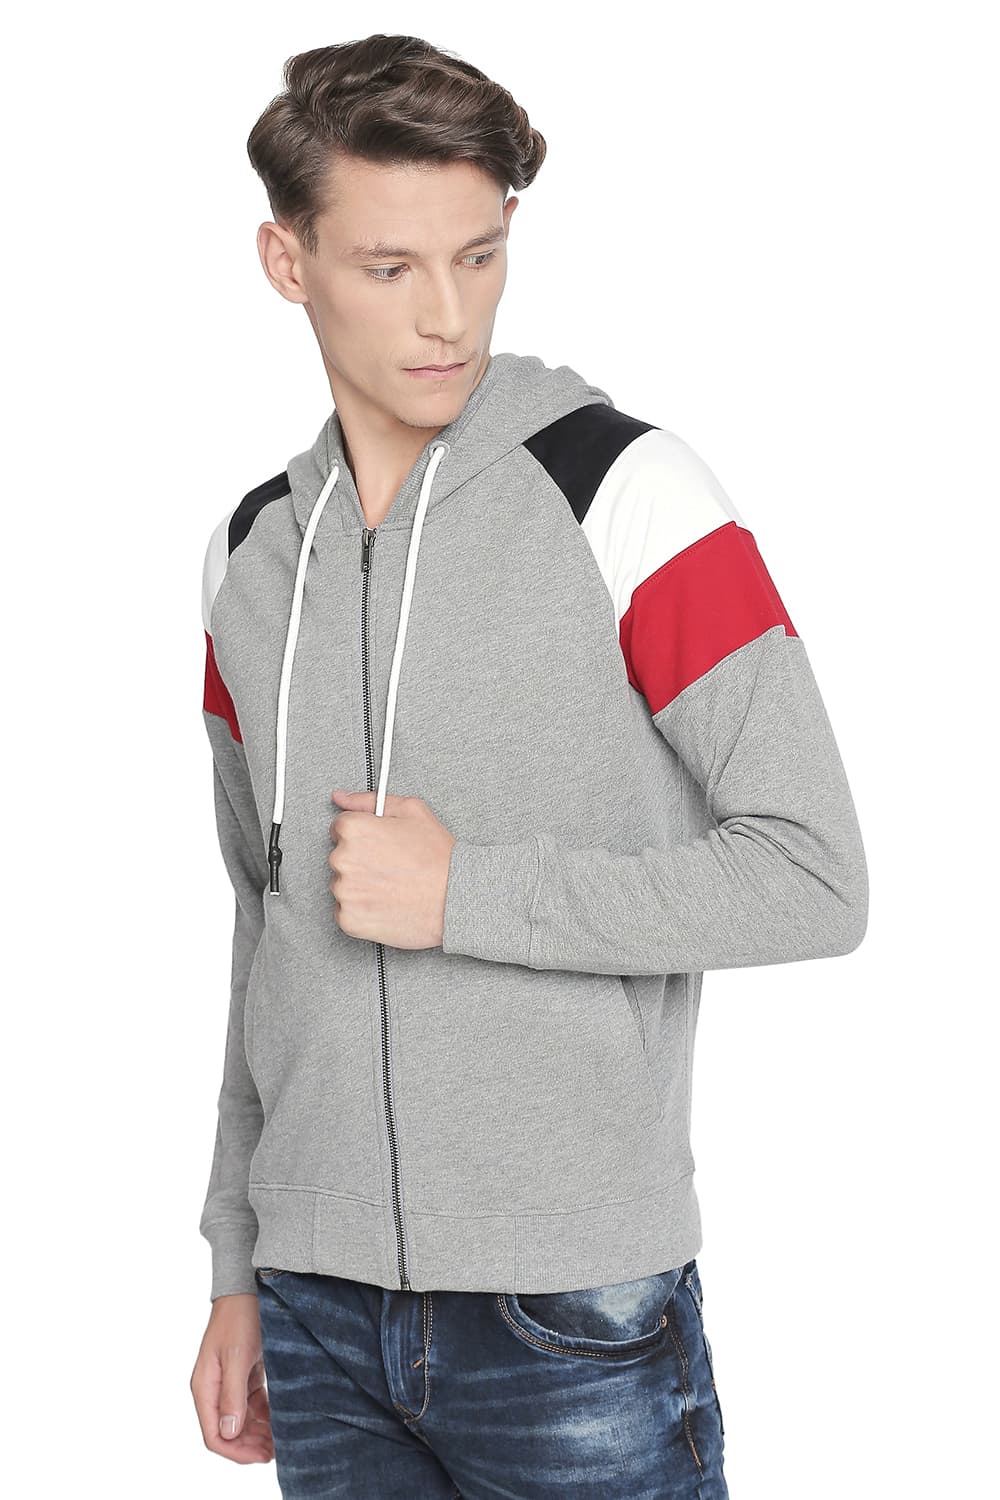 BASICS MUSCLE FIT COLOR BLOCK HOODED KNIT JACKET